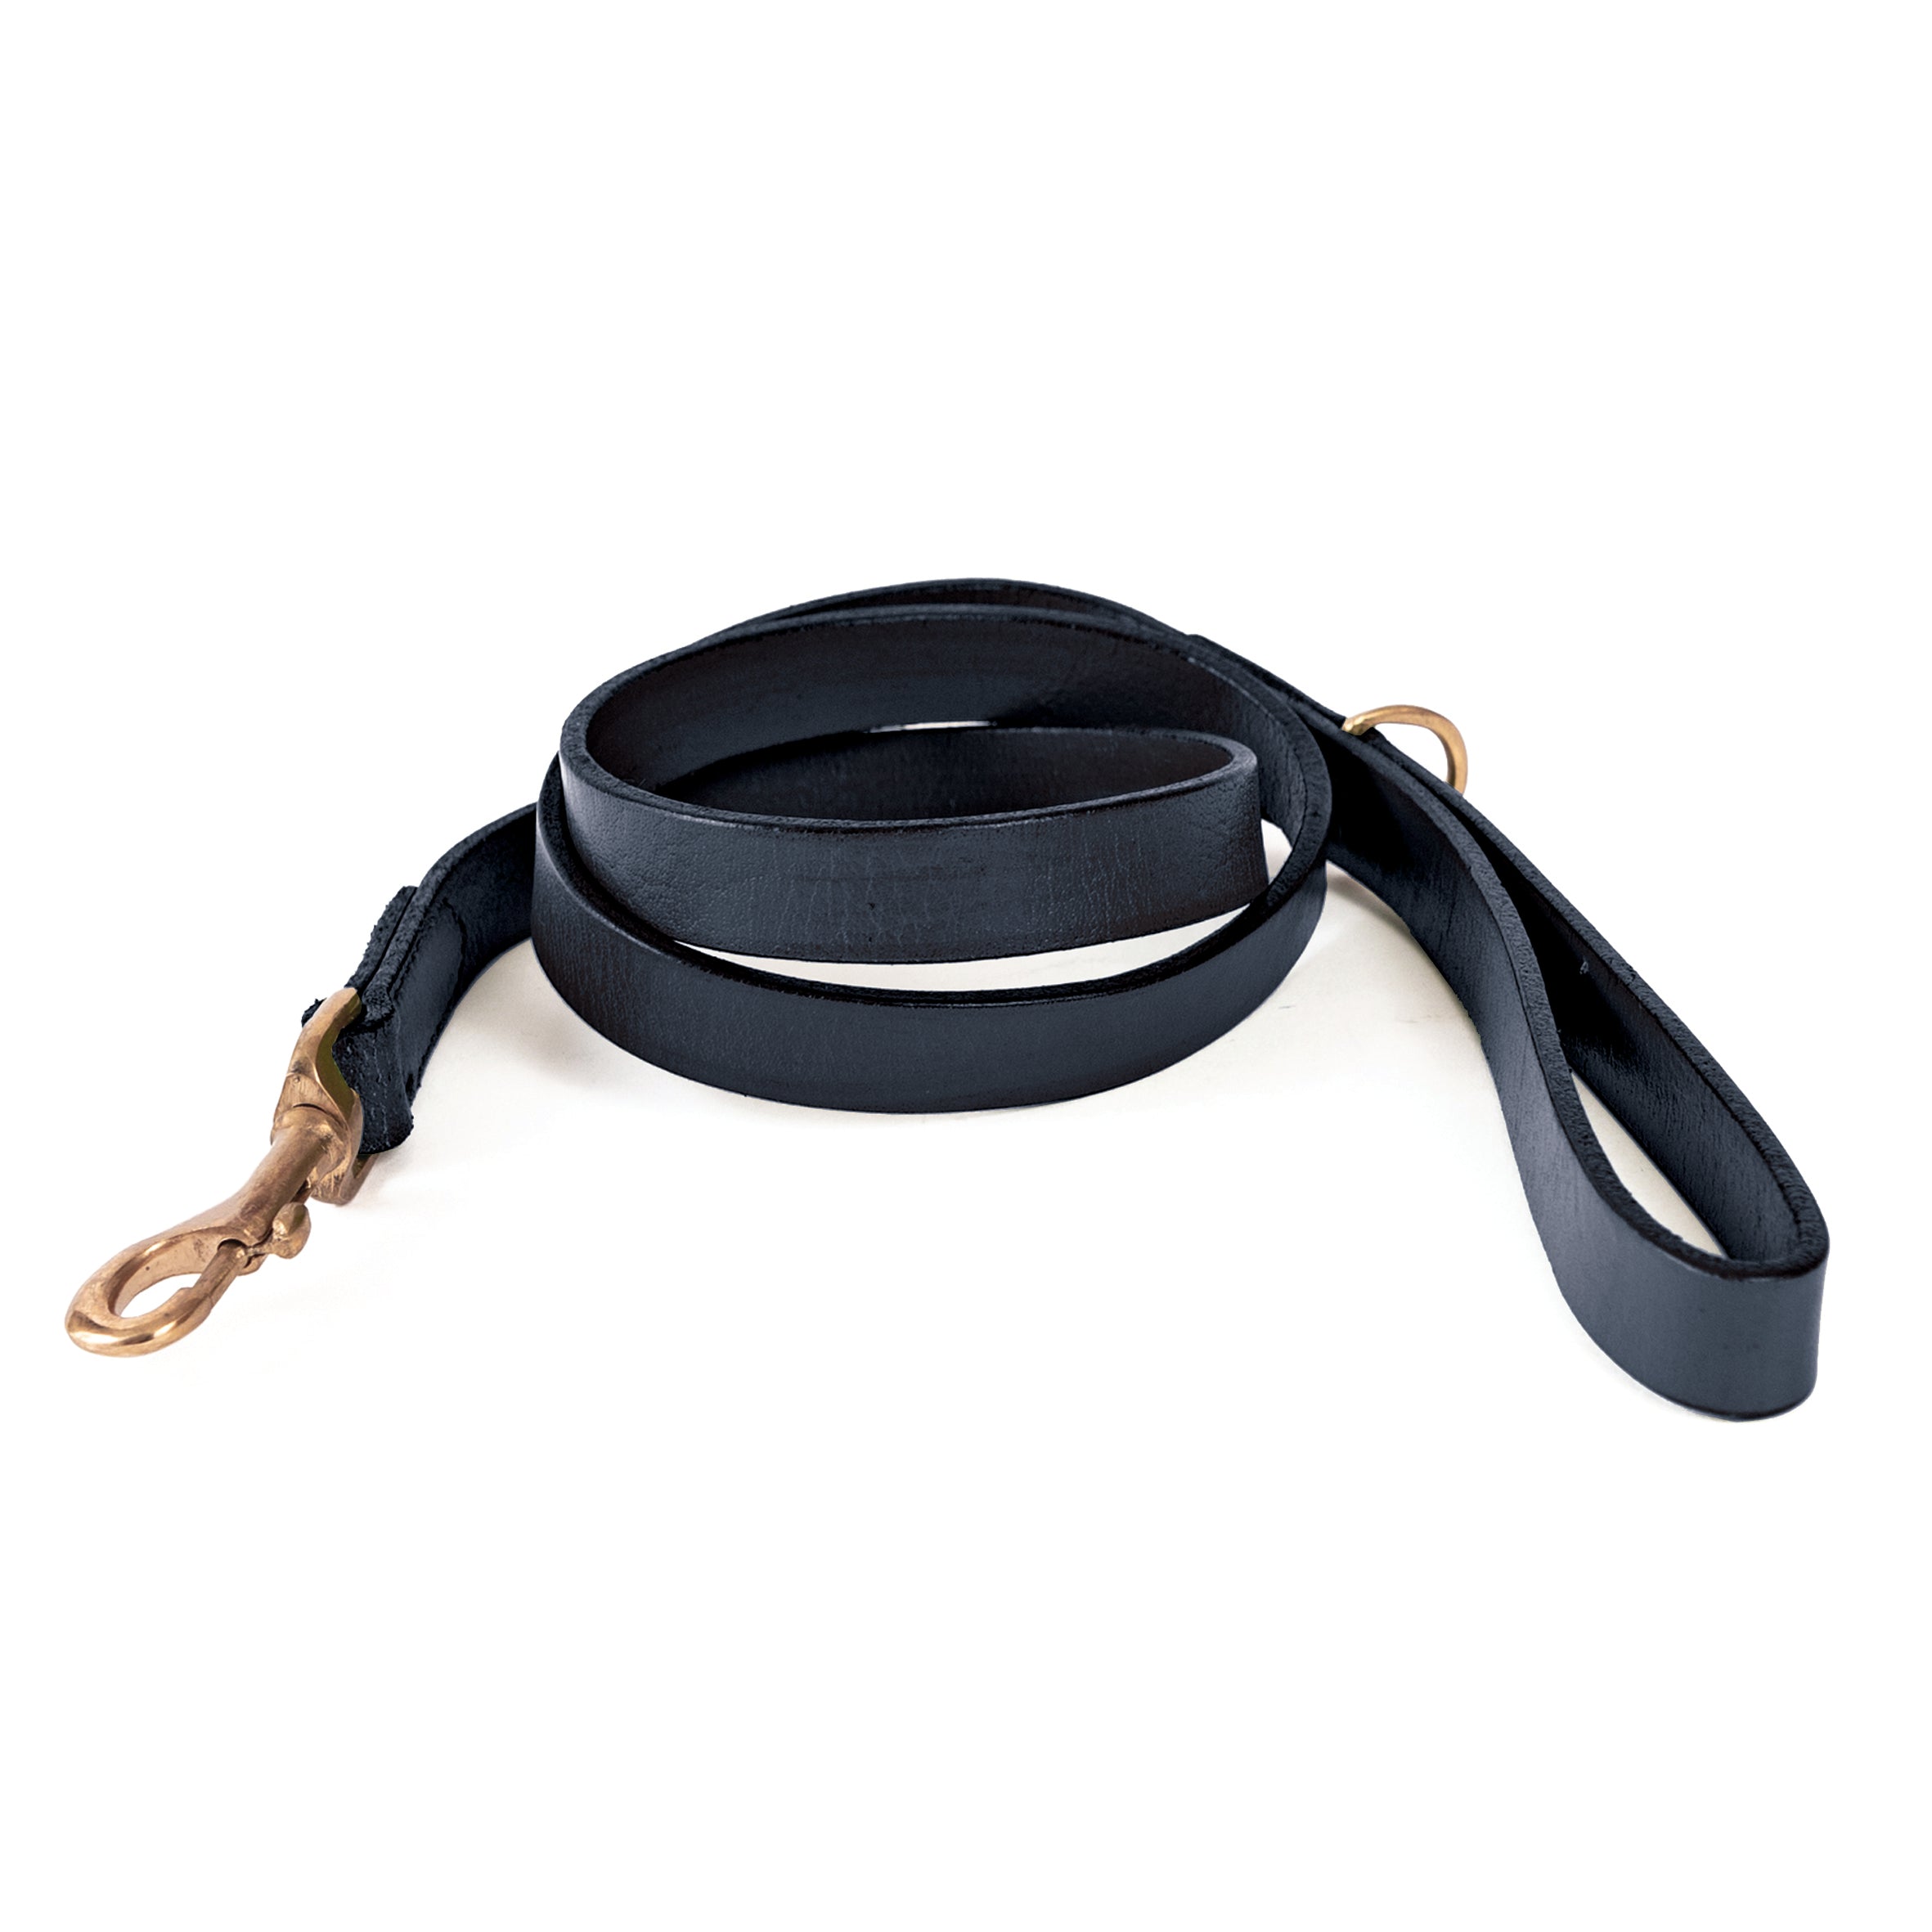 A hand-made Bald Lead Navy camera strap with a brass-colored swivel clip lies coiled against a white background, hinting at elegance and durability for photographers on the move. Brand Name: Georgie Paws